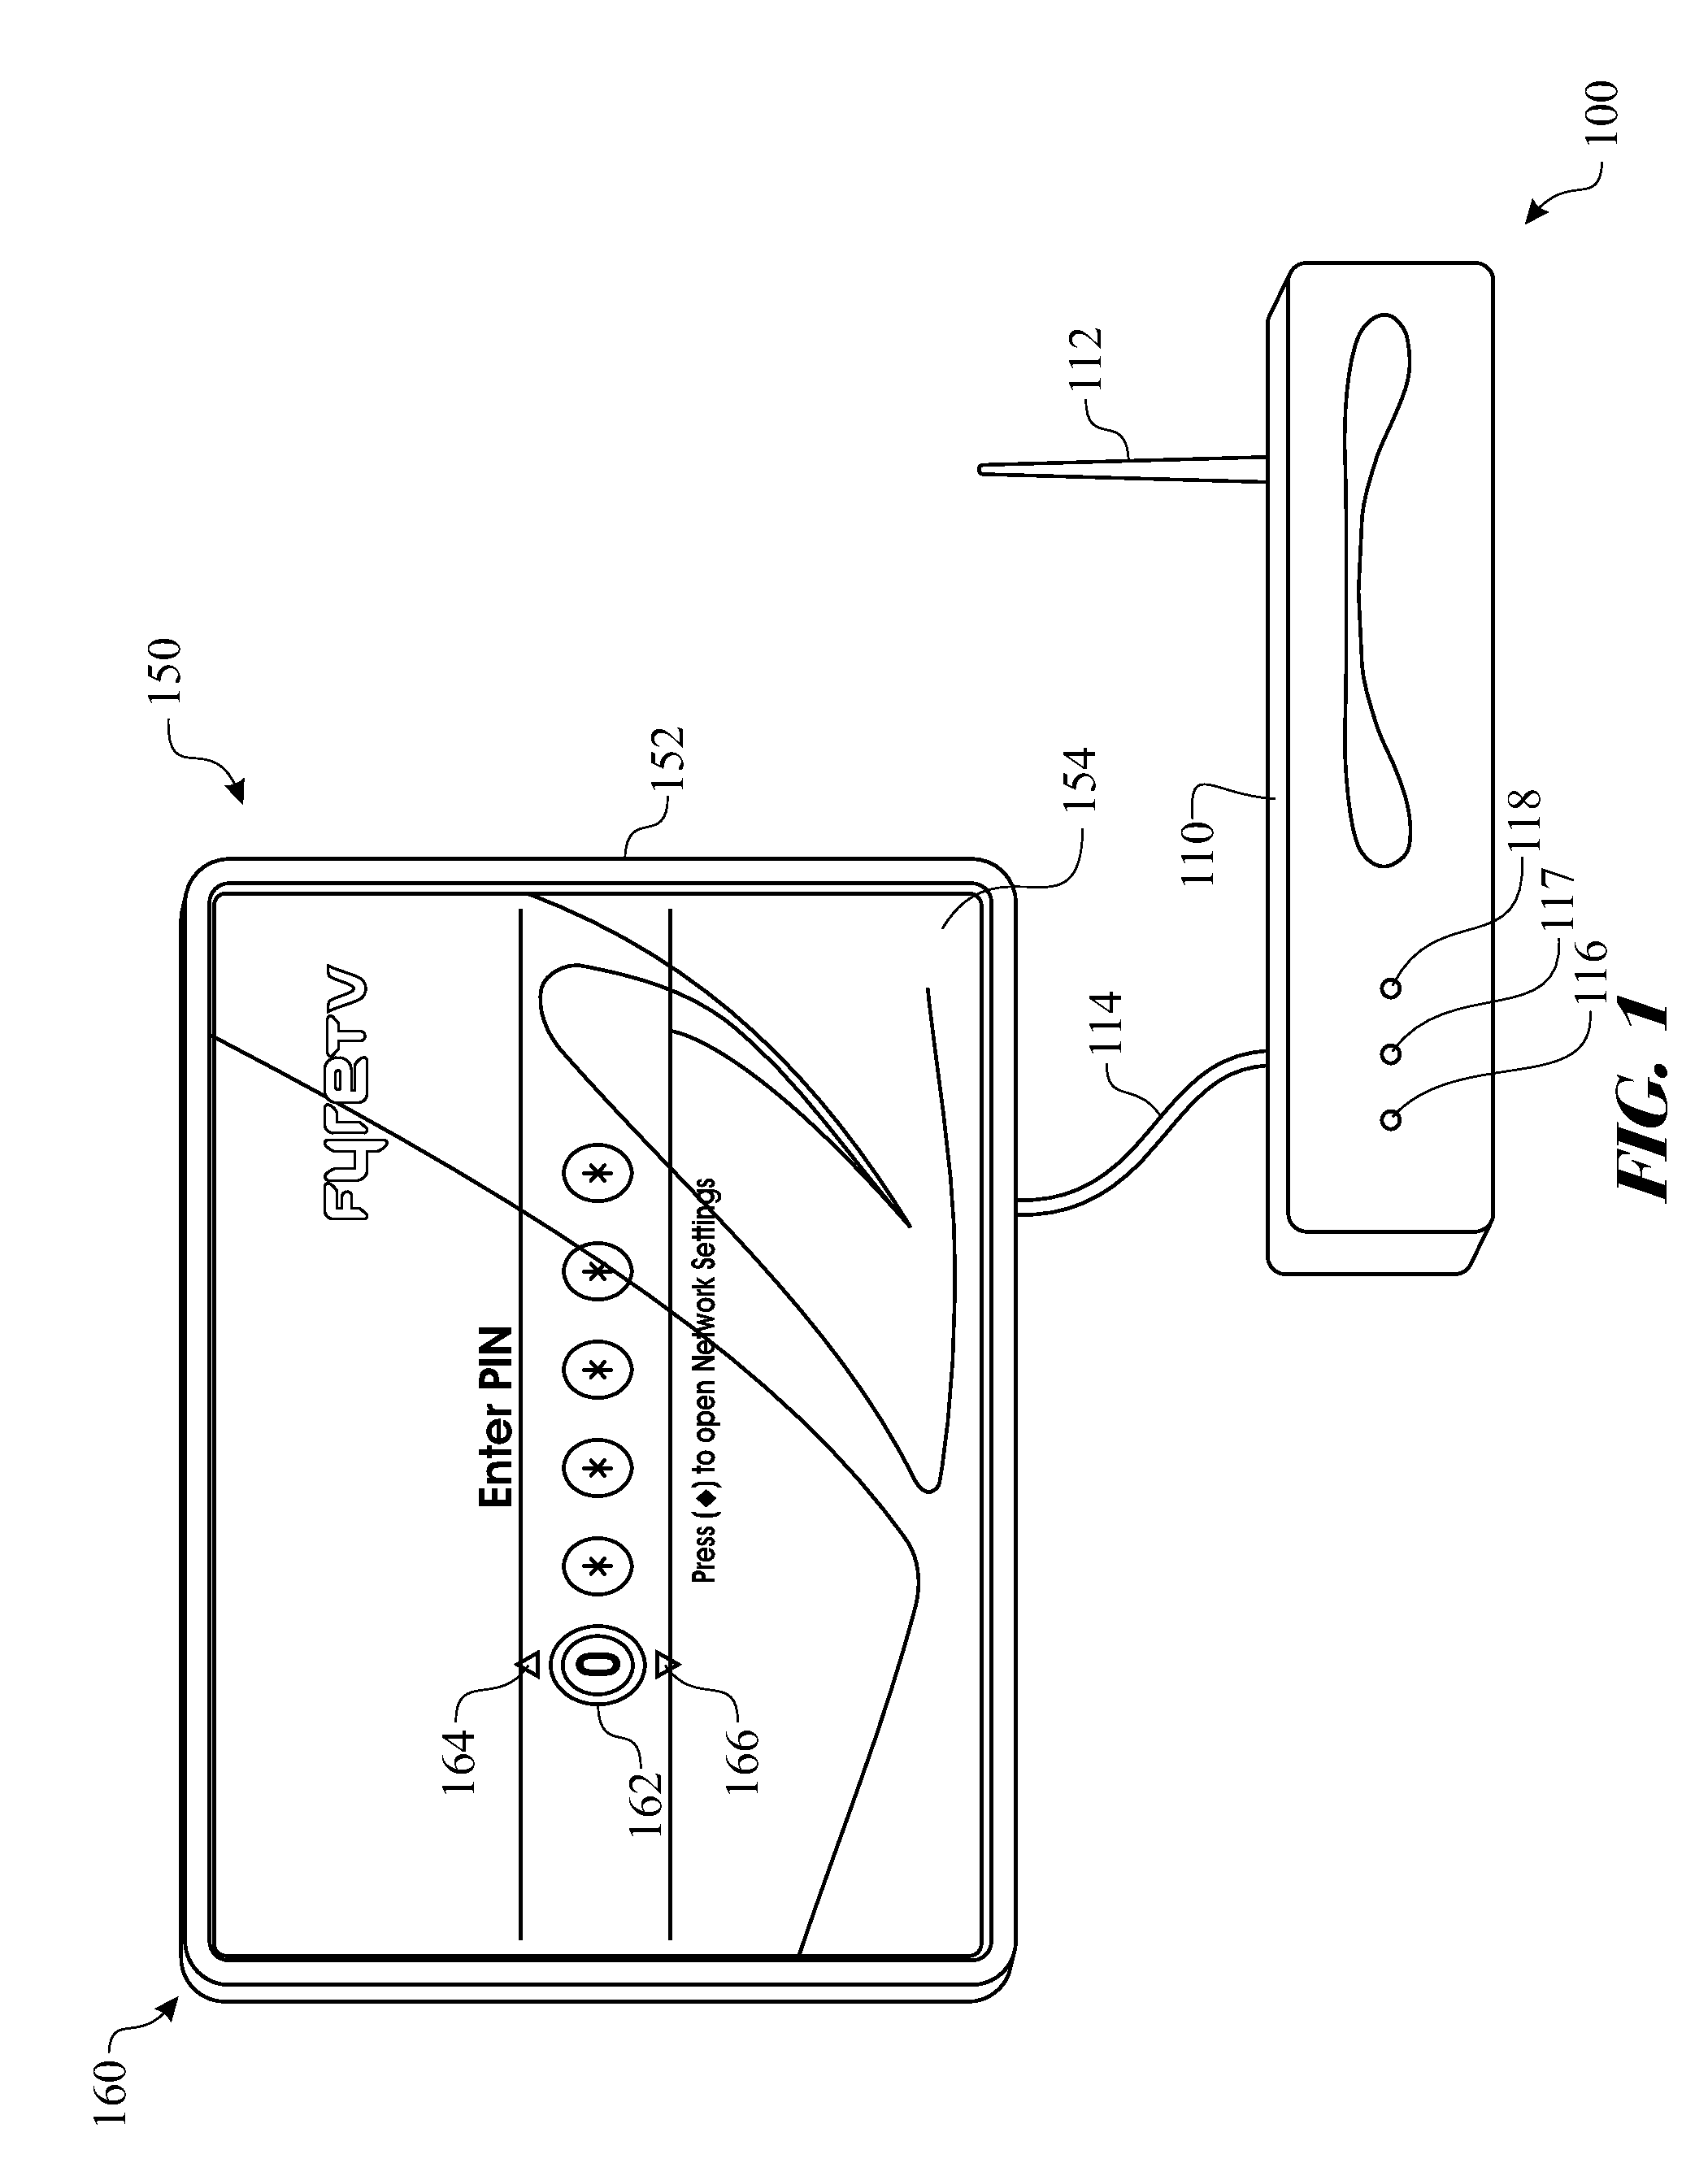 Video segment management and distribution system and method